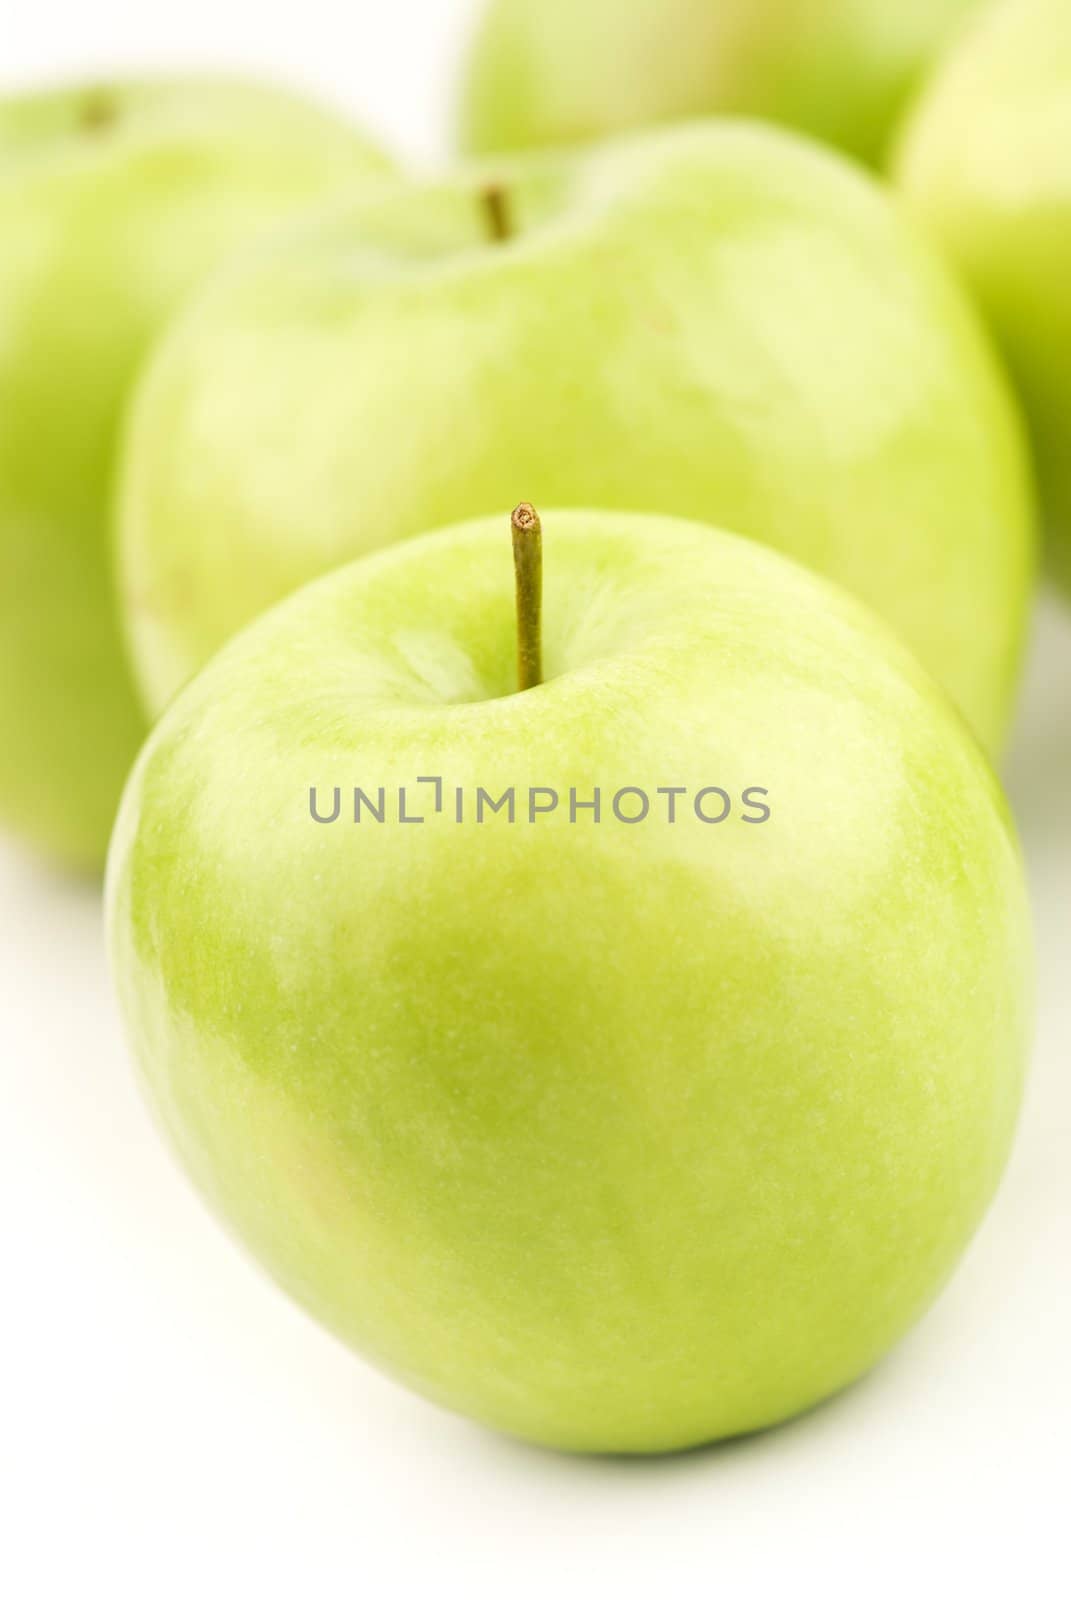 fruits in close up, focus point on nearest part of apple (stick)